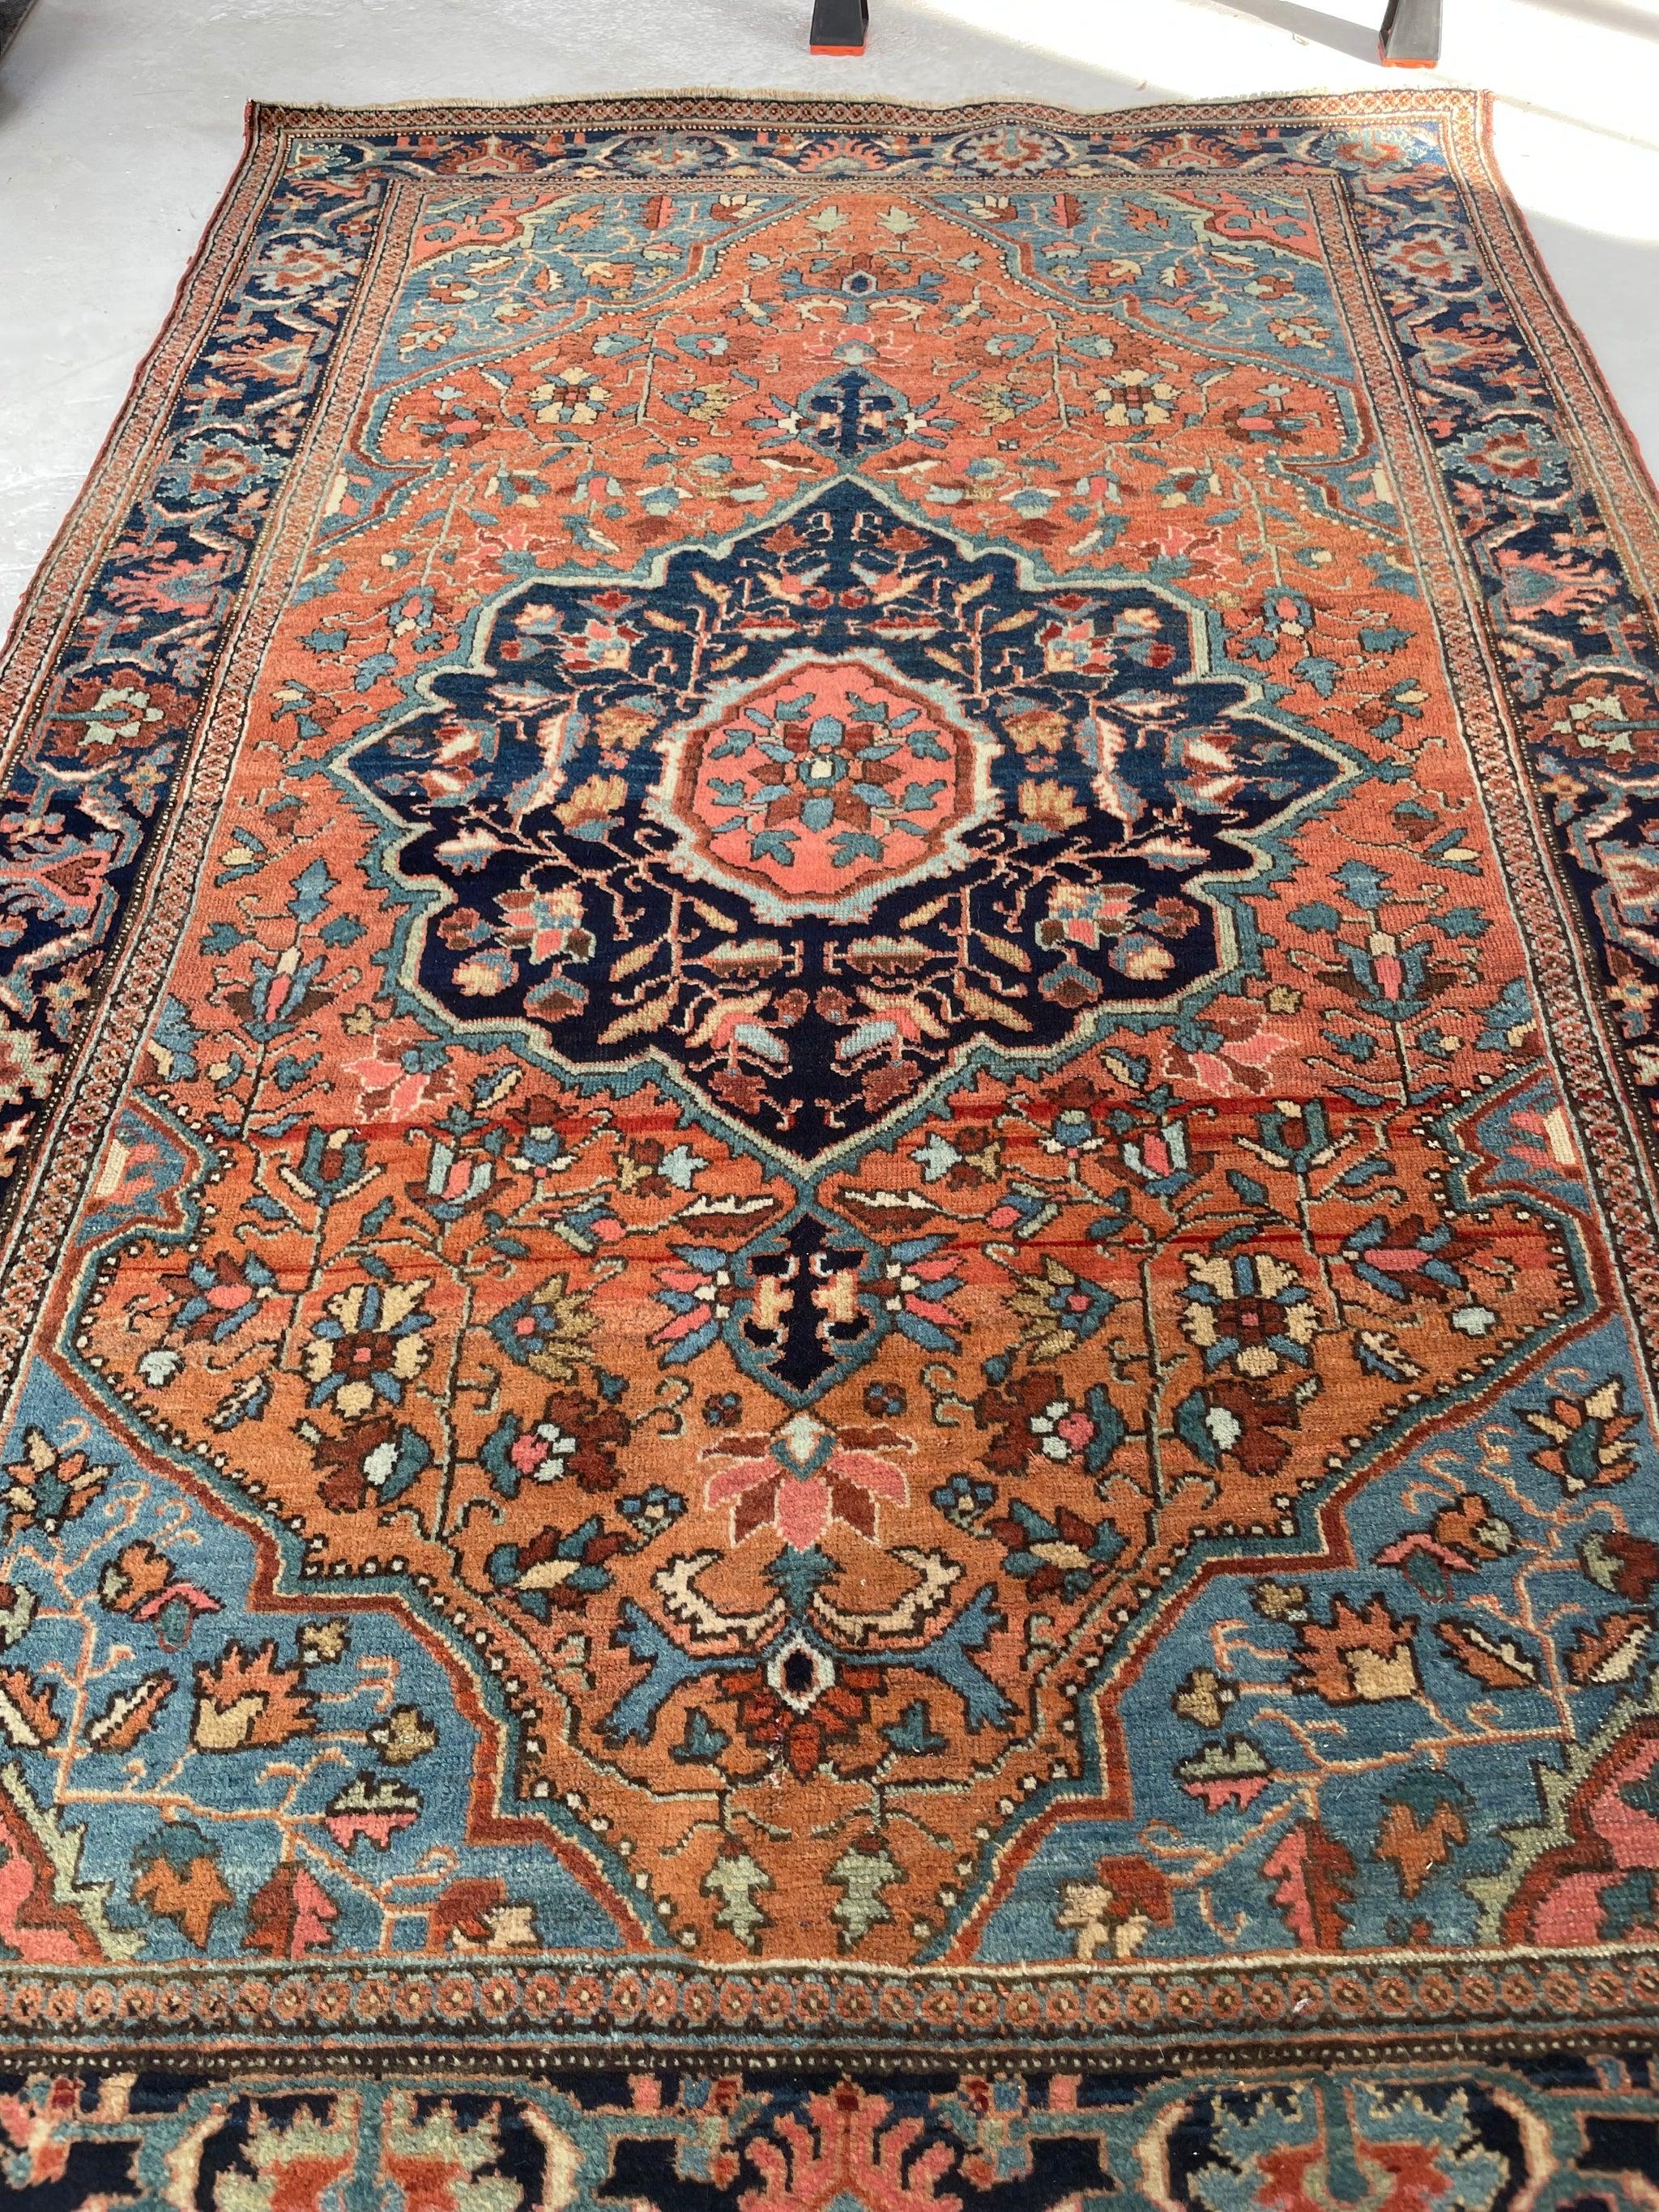 Sensational Antique Rug  Fine Ferahan-Malayer Terracotta, Ice & Greens

Size: 4.3 x 6.4
Age: Antique, C. 1920-30's
Pile: Low with age-related wear and lovely patina throughout. Superb condition for its age nearly mint condition.

This rug is